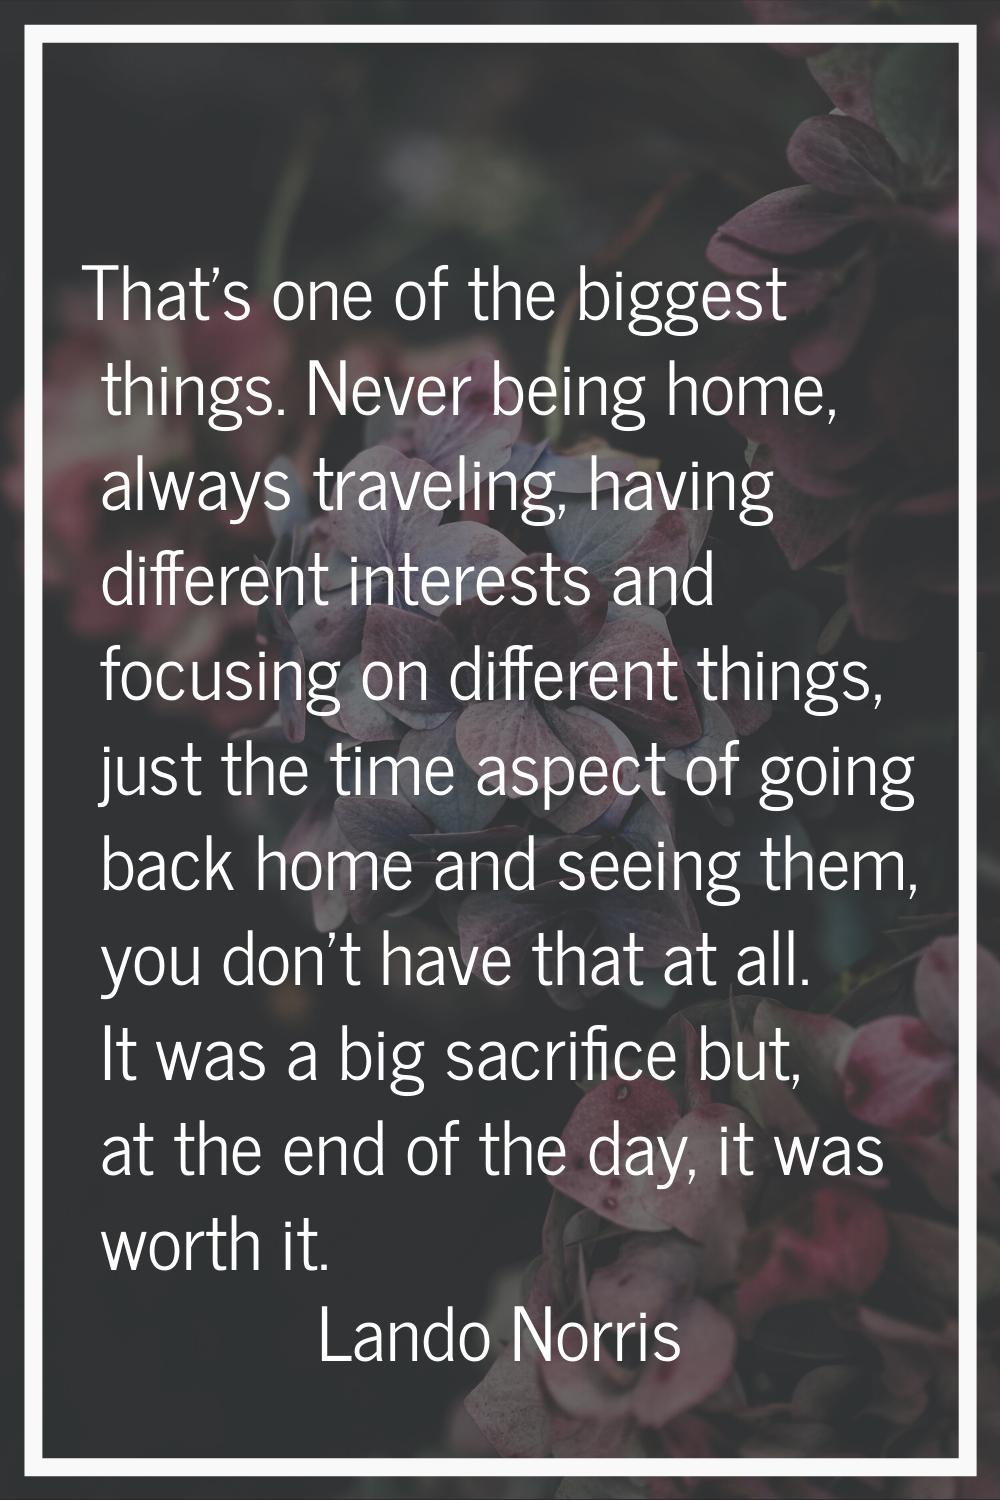 That's one of the biggest things. Never being home, always traveling, having different interests an